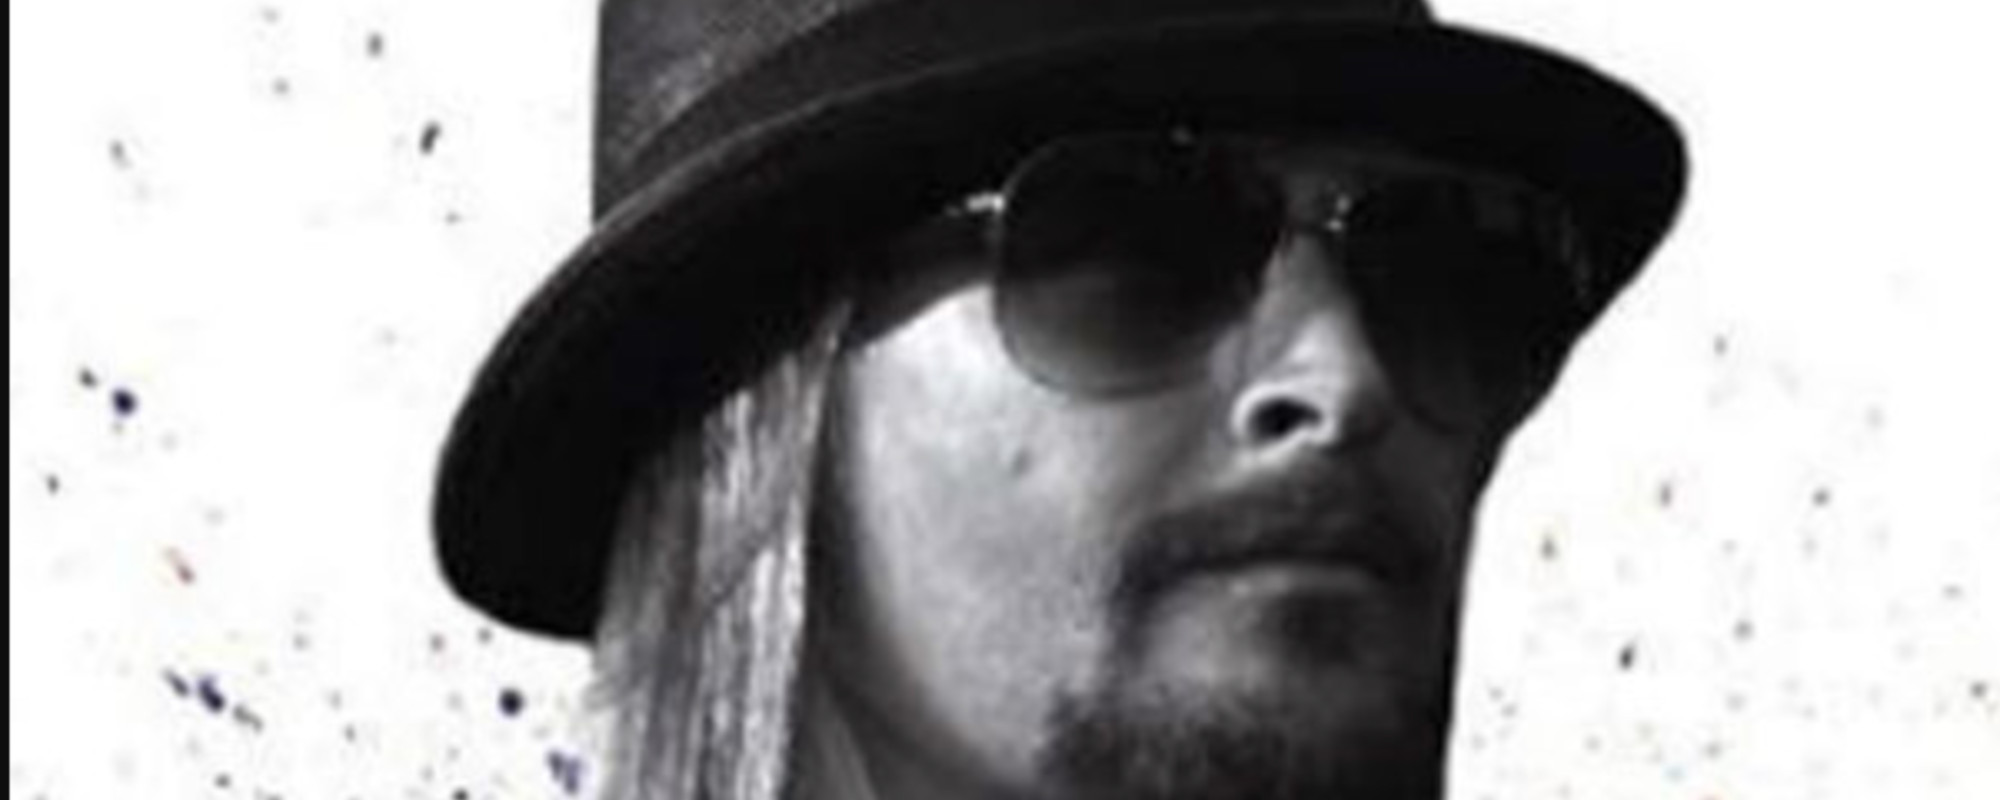 Kid Rock Refuses to Apologize to Oprah Winfrey After Explicit Rant